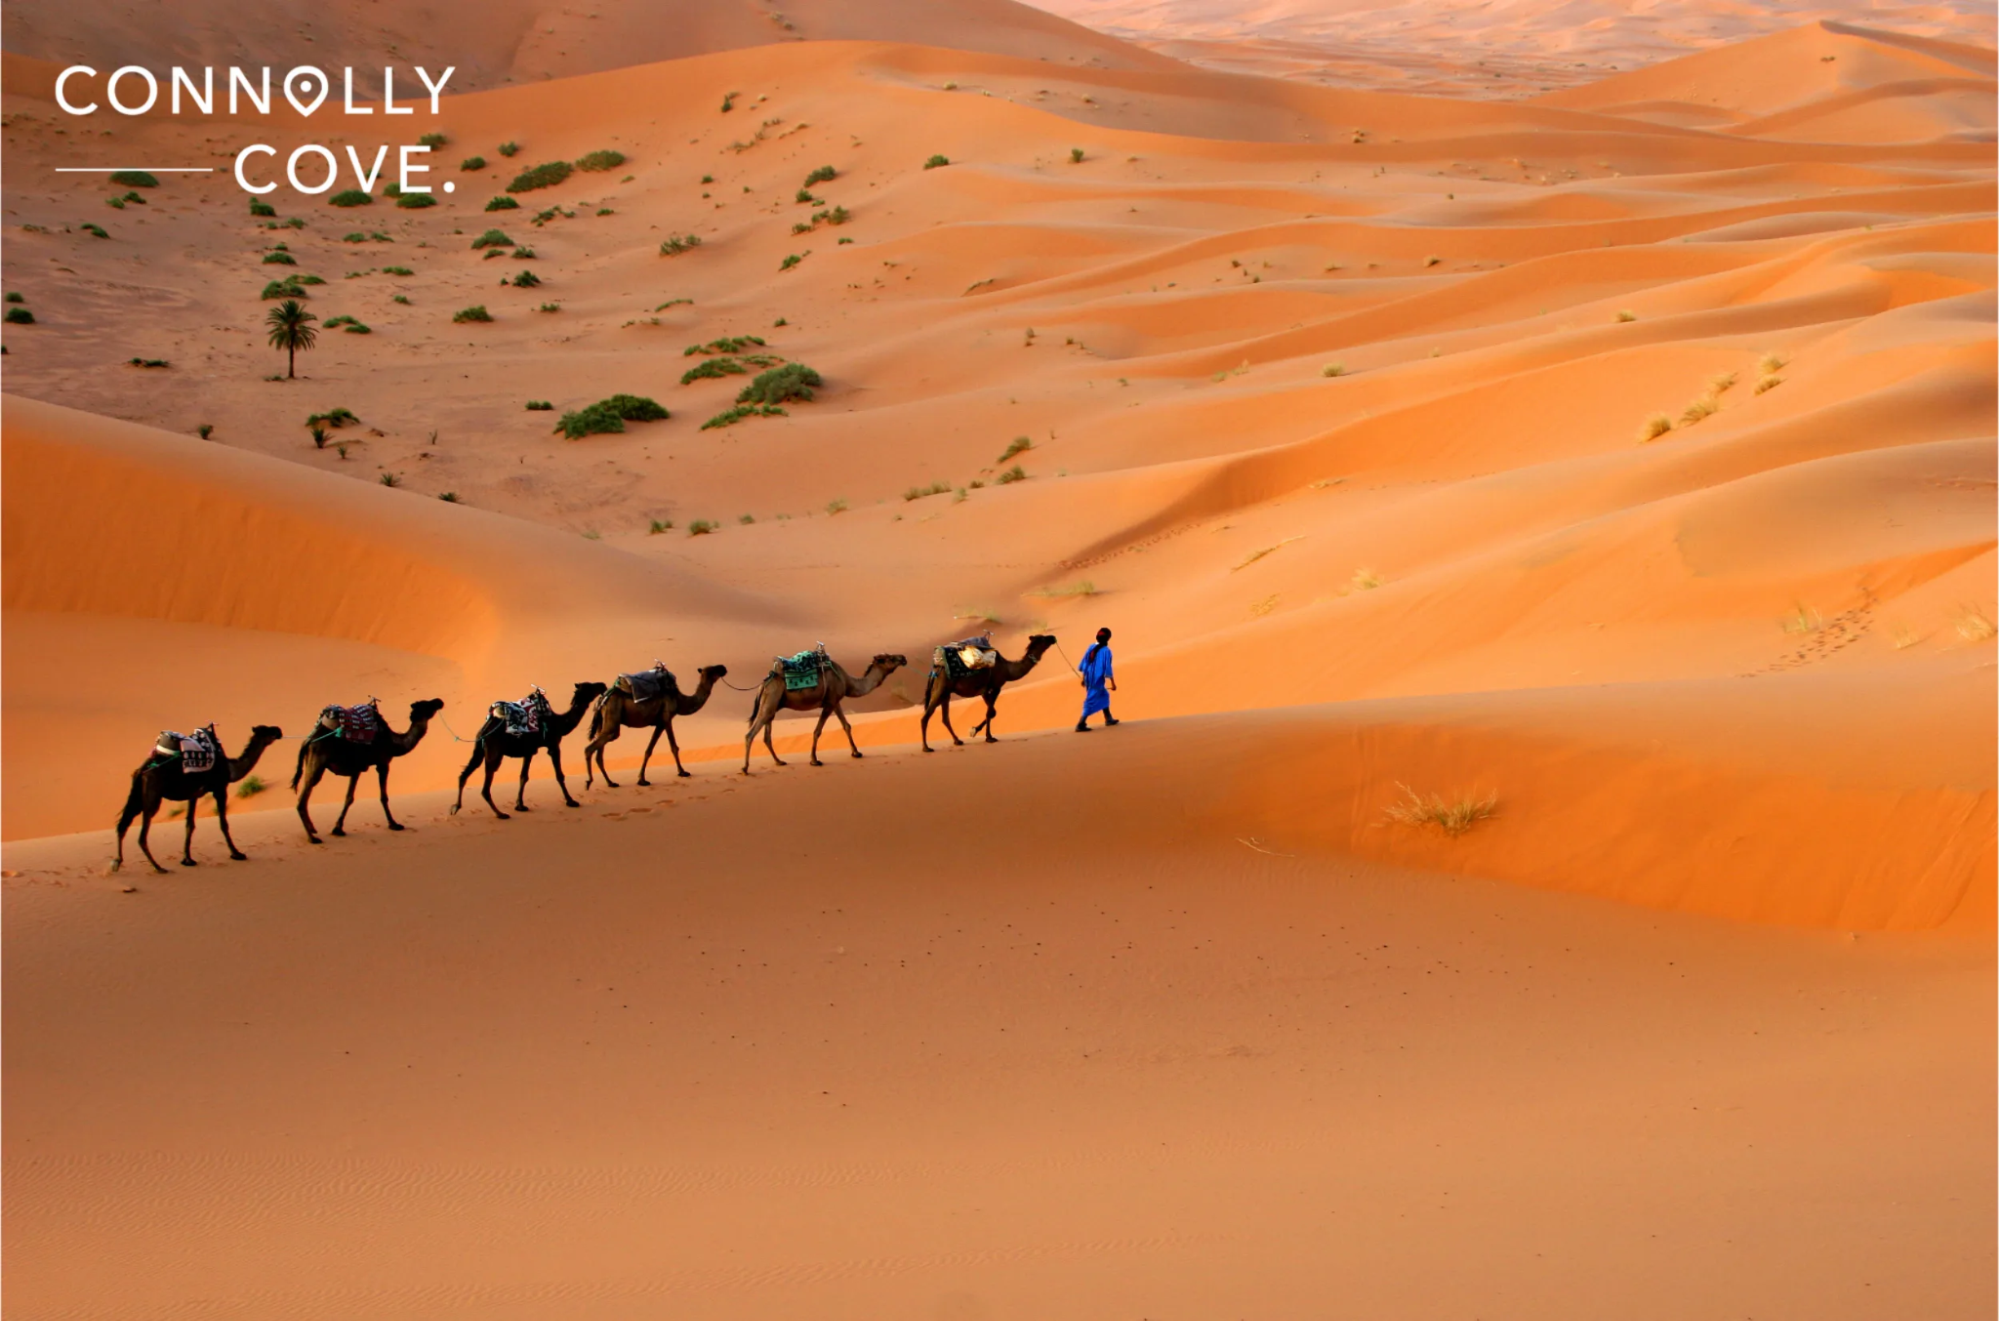 Photo of man walking camels in desert with Connolly Cove logo watermark